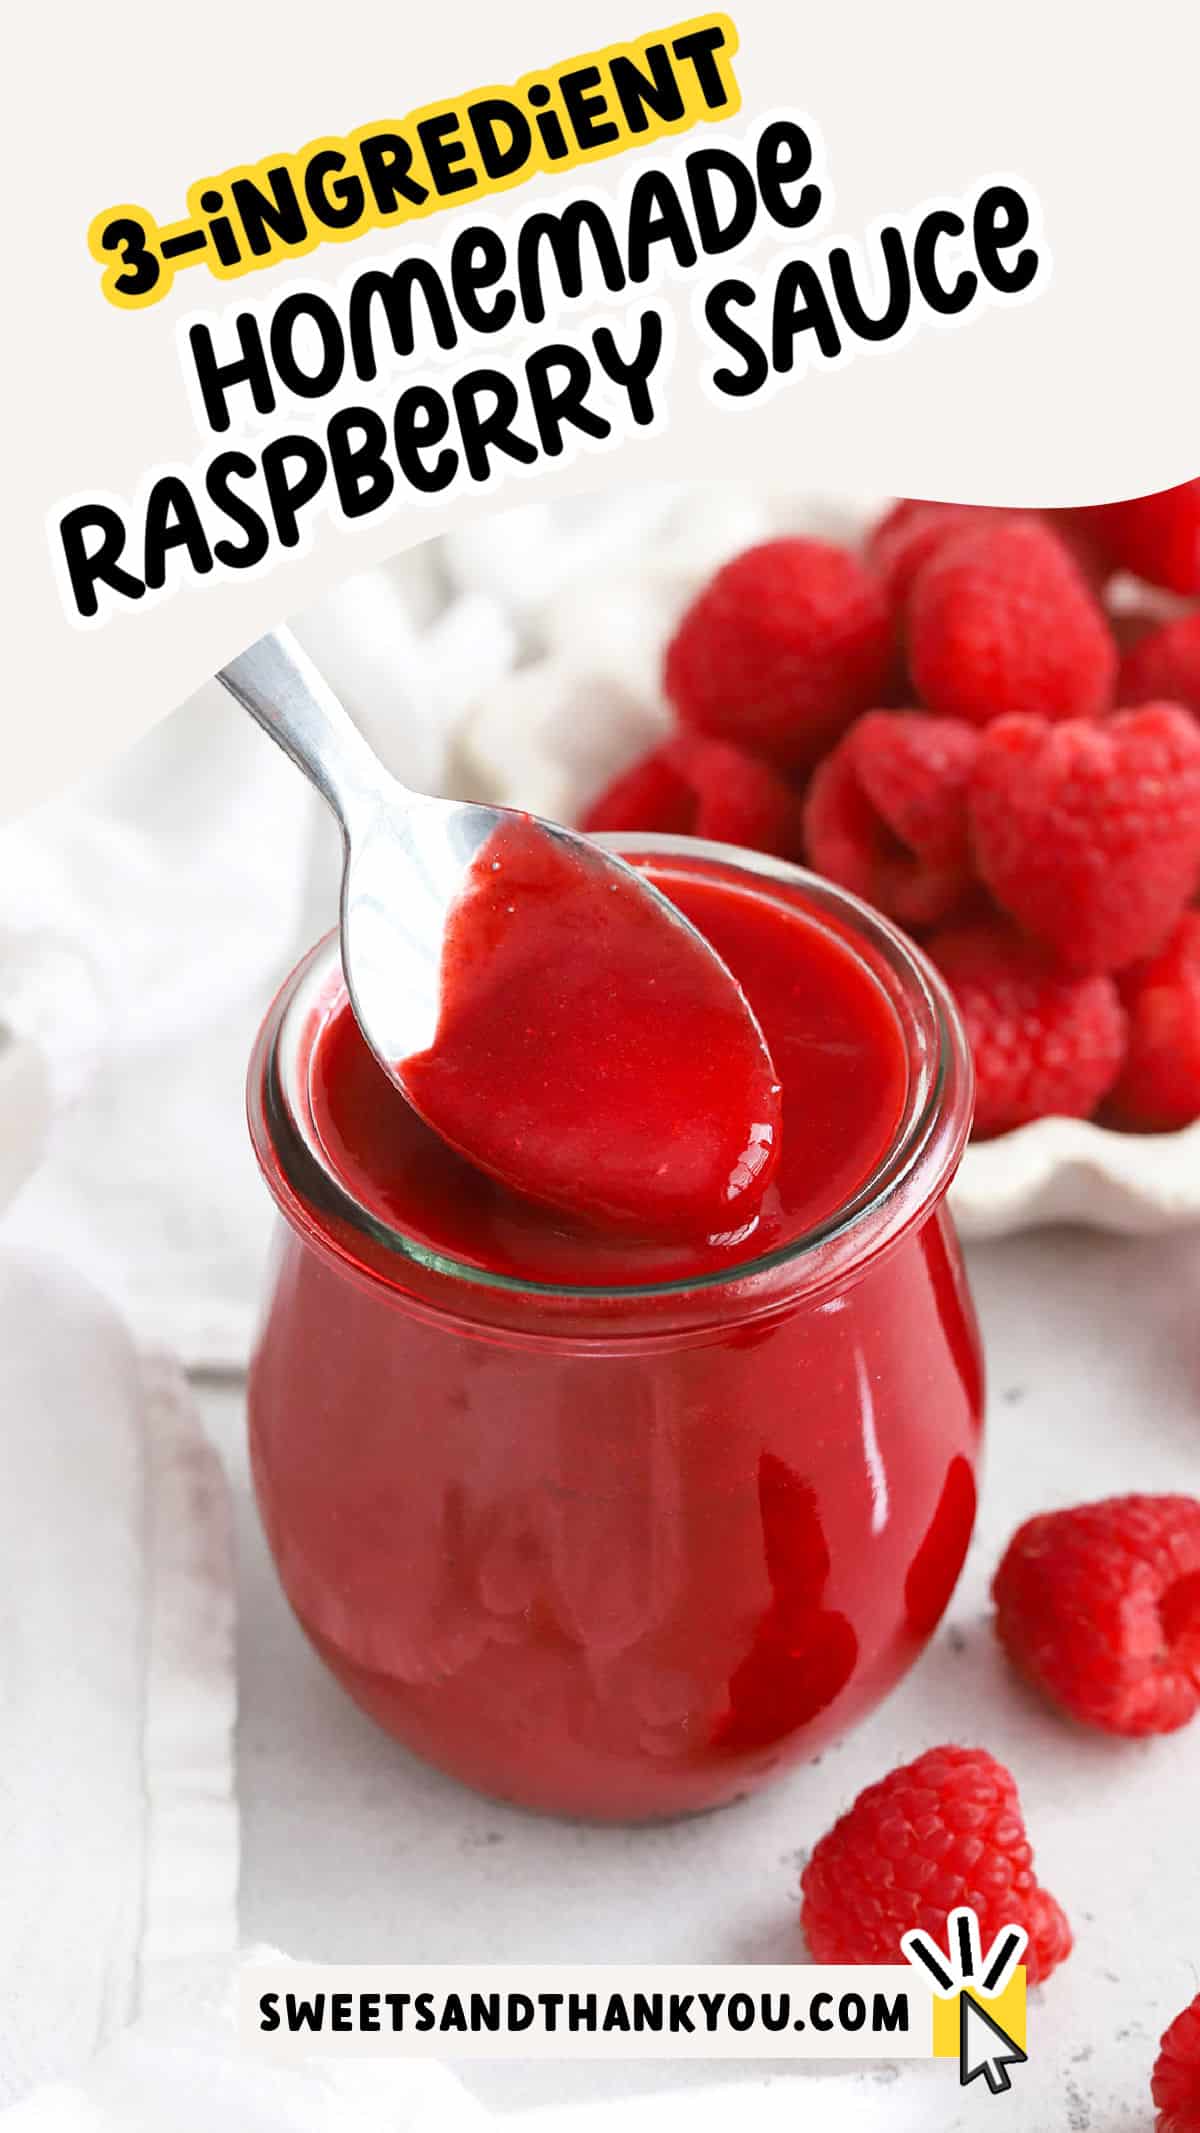 How to make Raspberry Coulis! This fresh raspberry sauce recipe adds vibrant fresh flavor to desserts, treats, breakfasts, and more! Try it as a topping for cake, a garnish to a dessert plate, or spoon over breakfast faves like waffles or french toast! It's the perfect raspberry sauce for cheesecake, ice cream, and more. Get the recipe for this homemade raspberry sauce (+delicious ways to use it!) at Sweets & Thank You